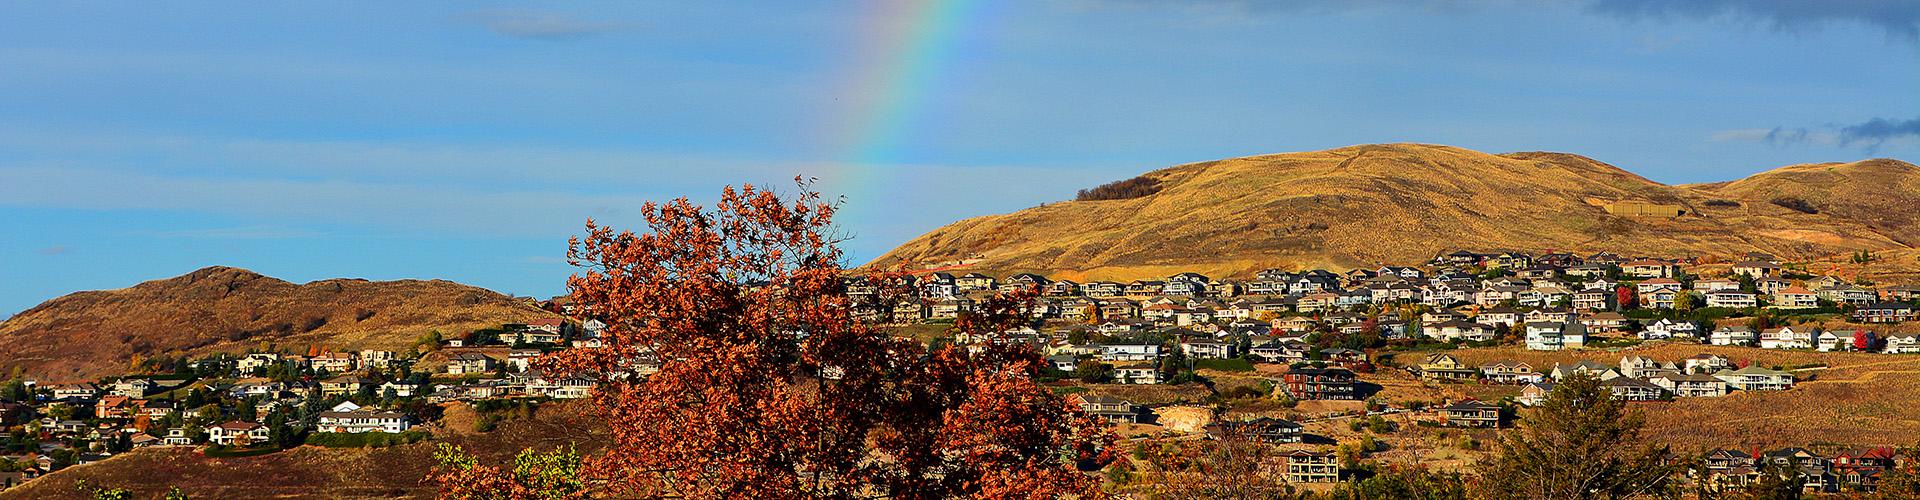 Foothills with houses on them and rainbow in background